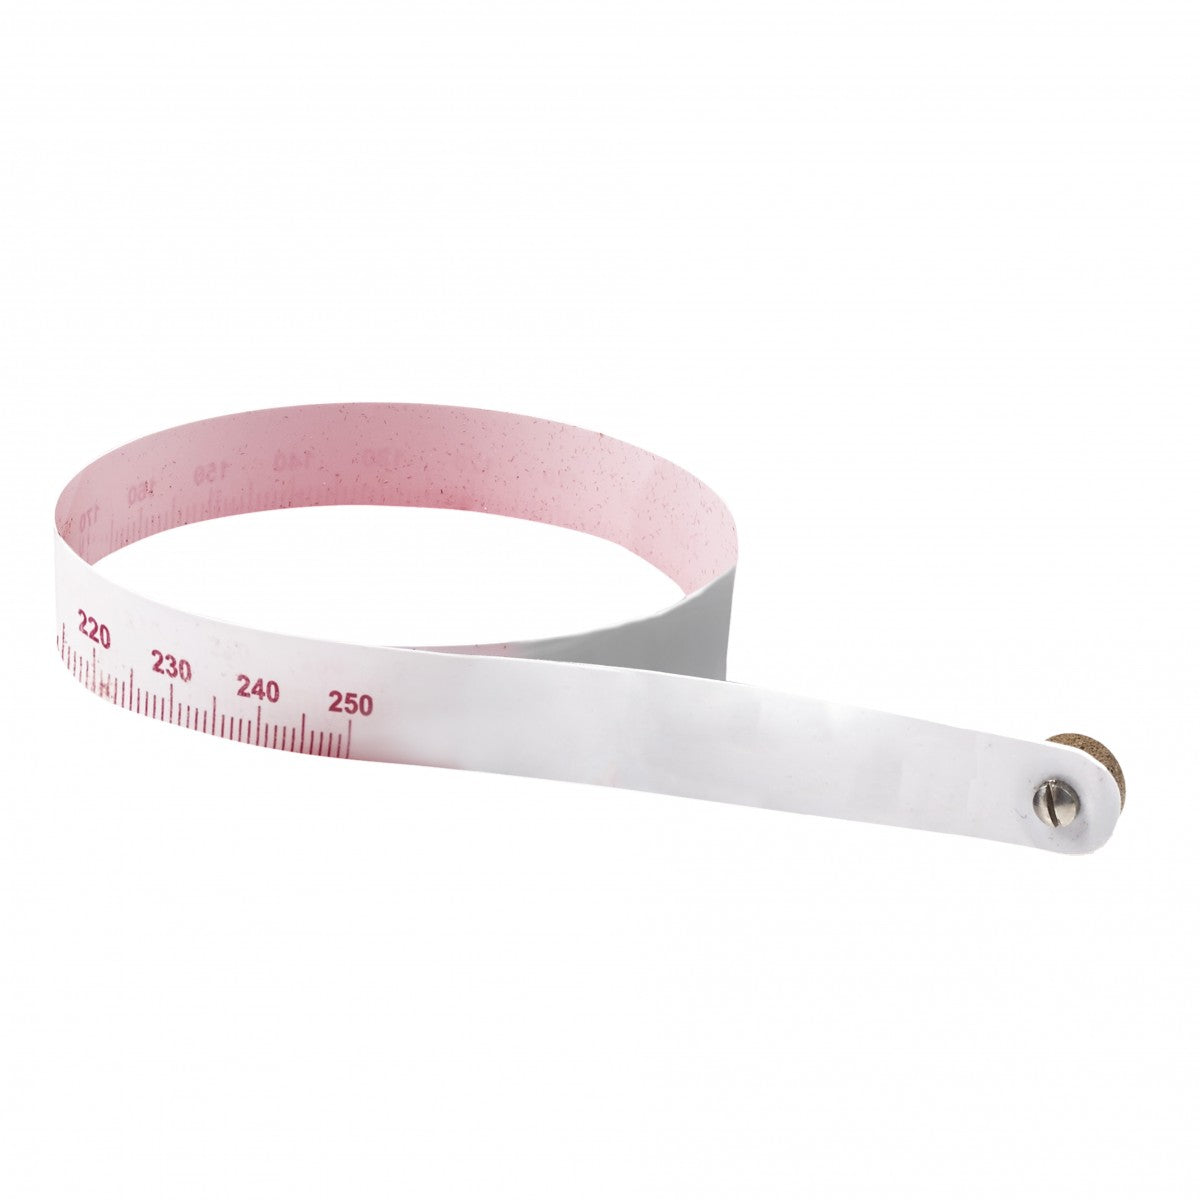 Circumference Measure - Replacement Tape